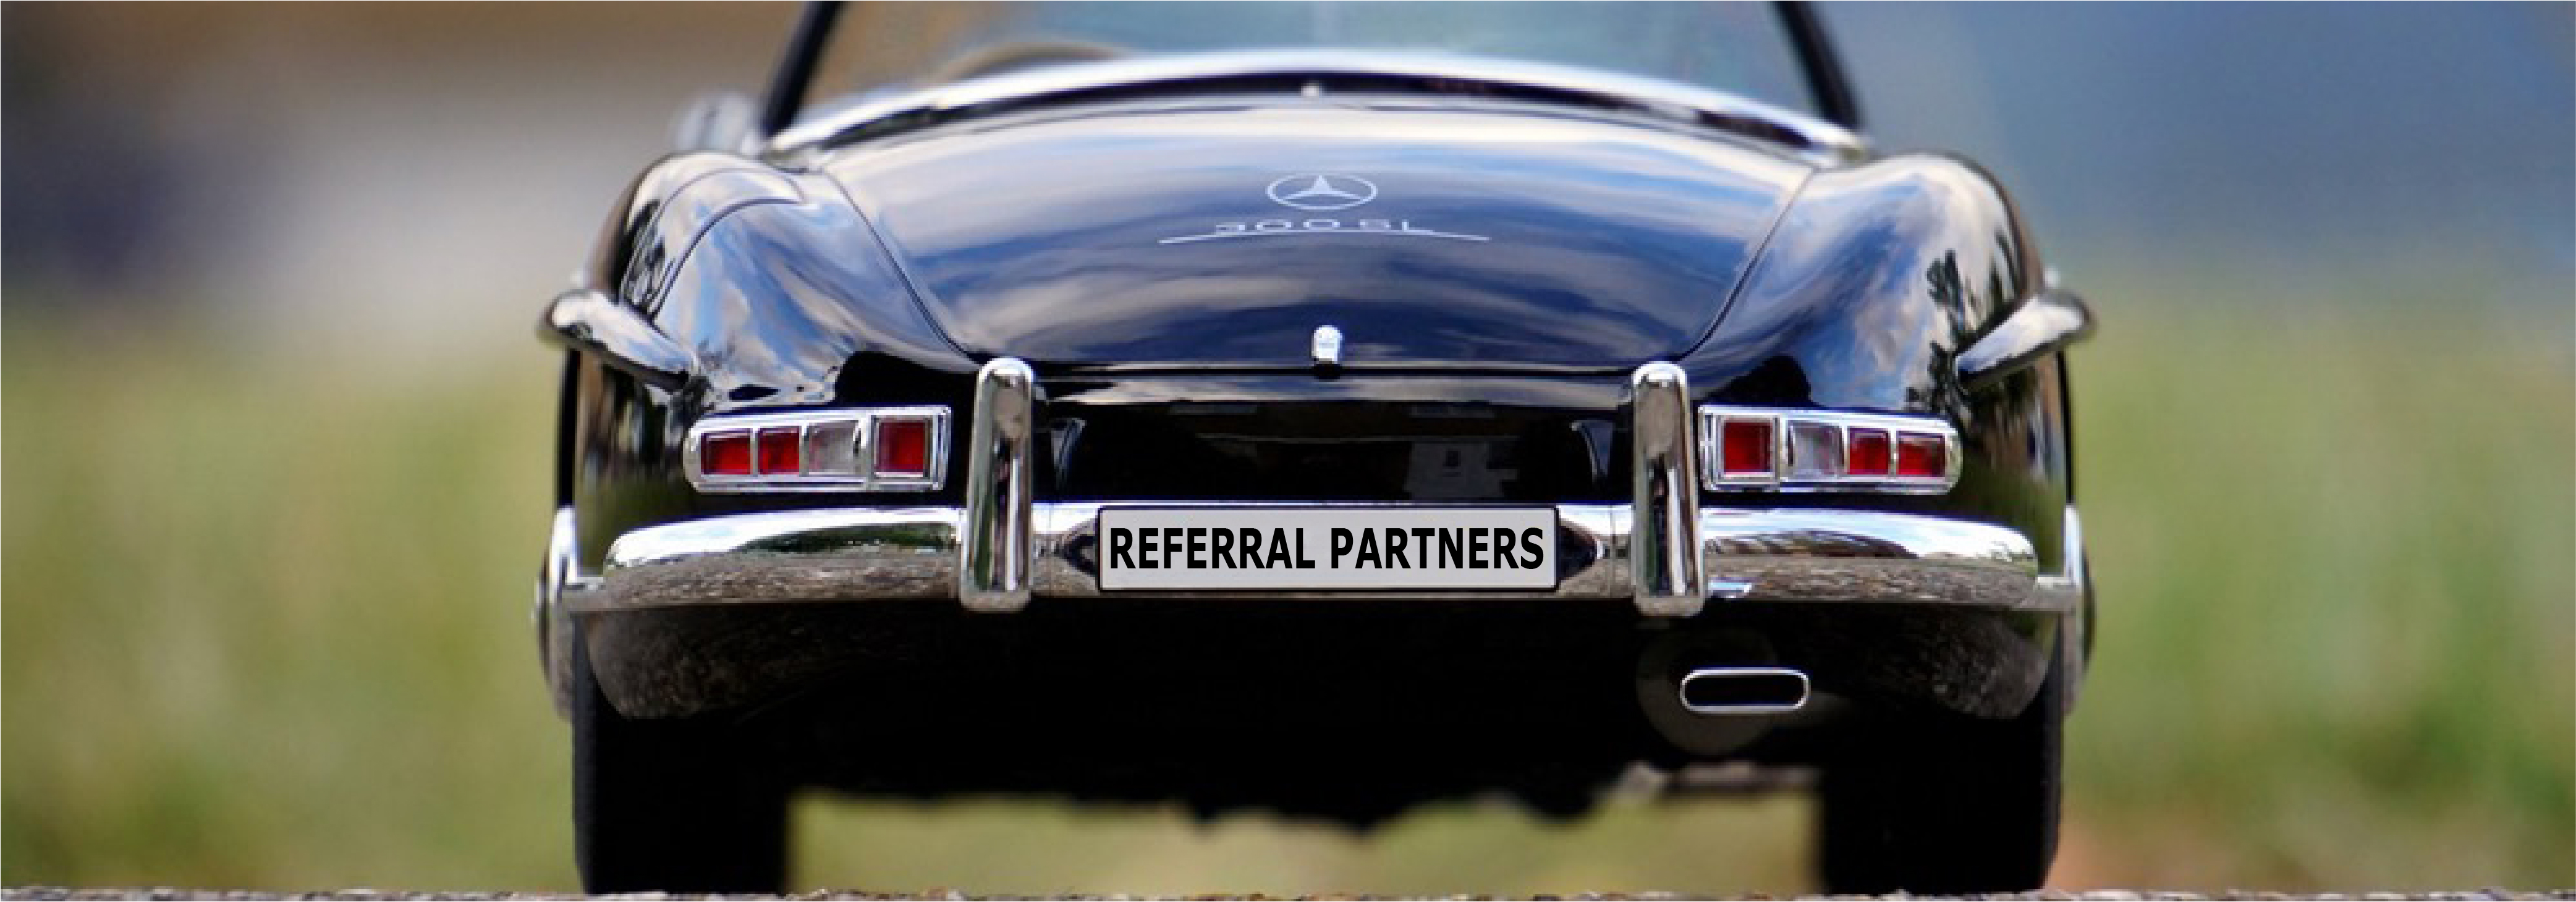 Why referral partners are more engaged than reseller